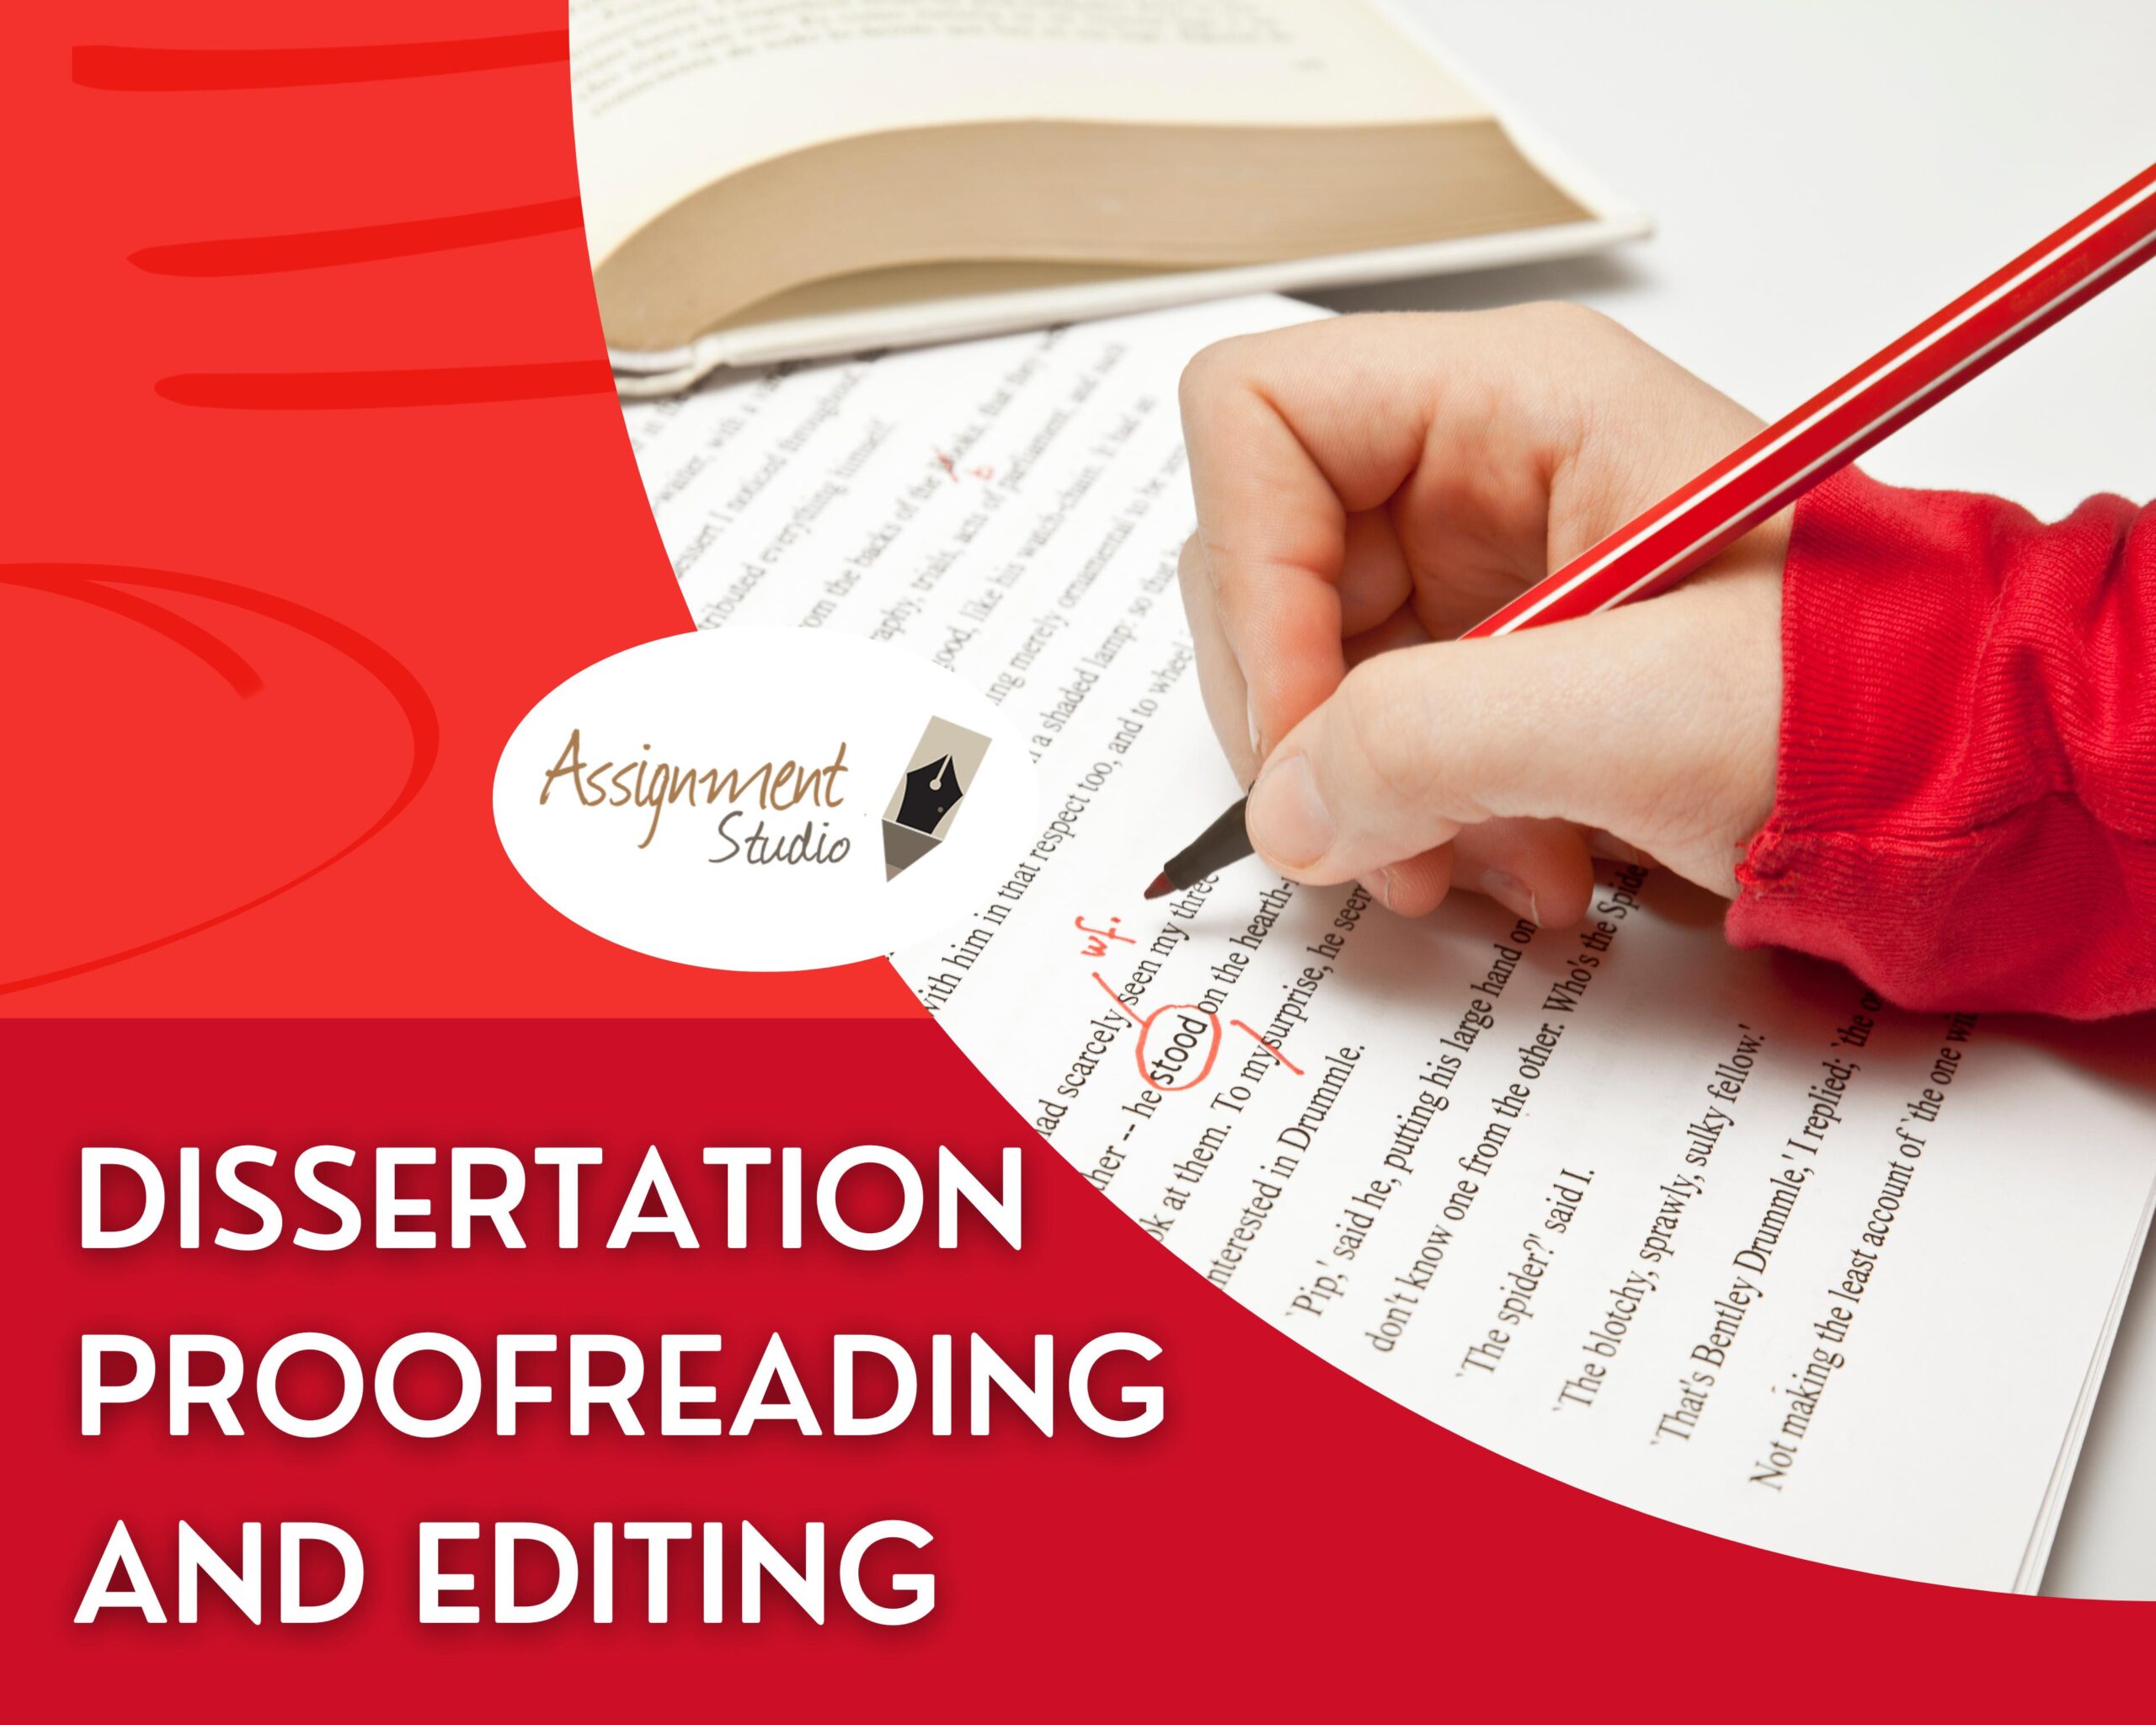 dissertation proofreading and editing